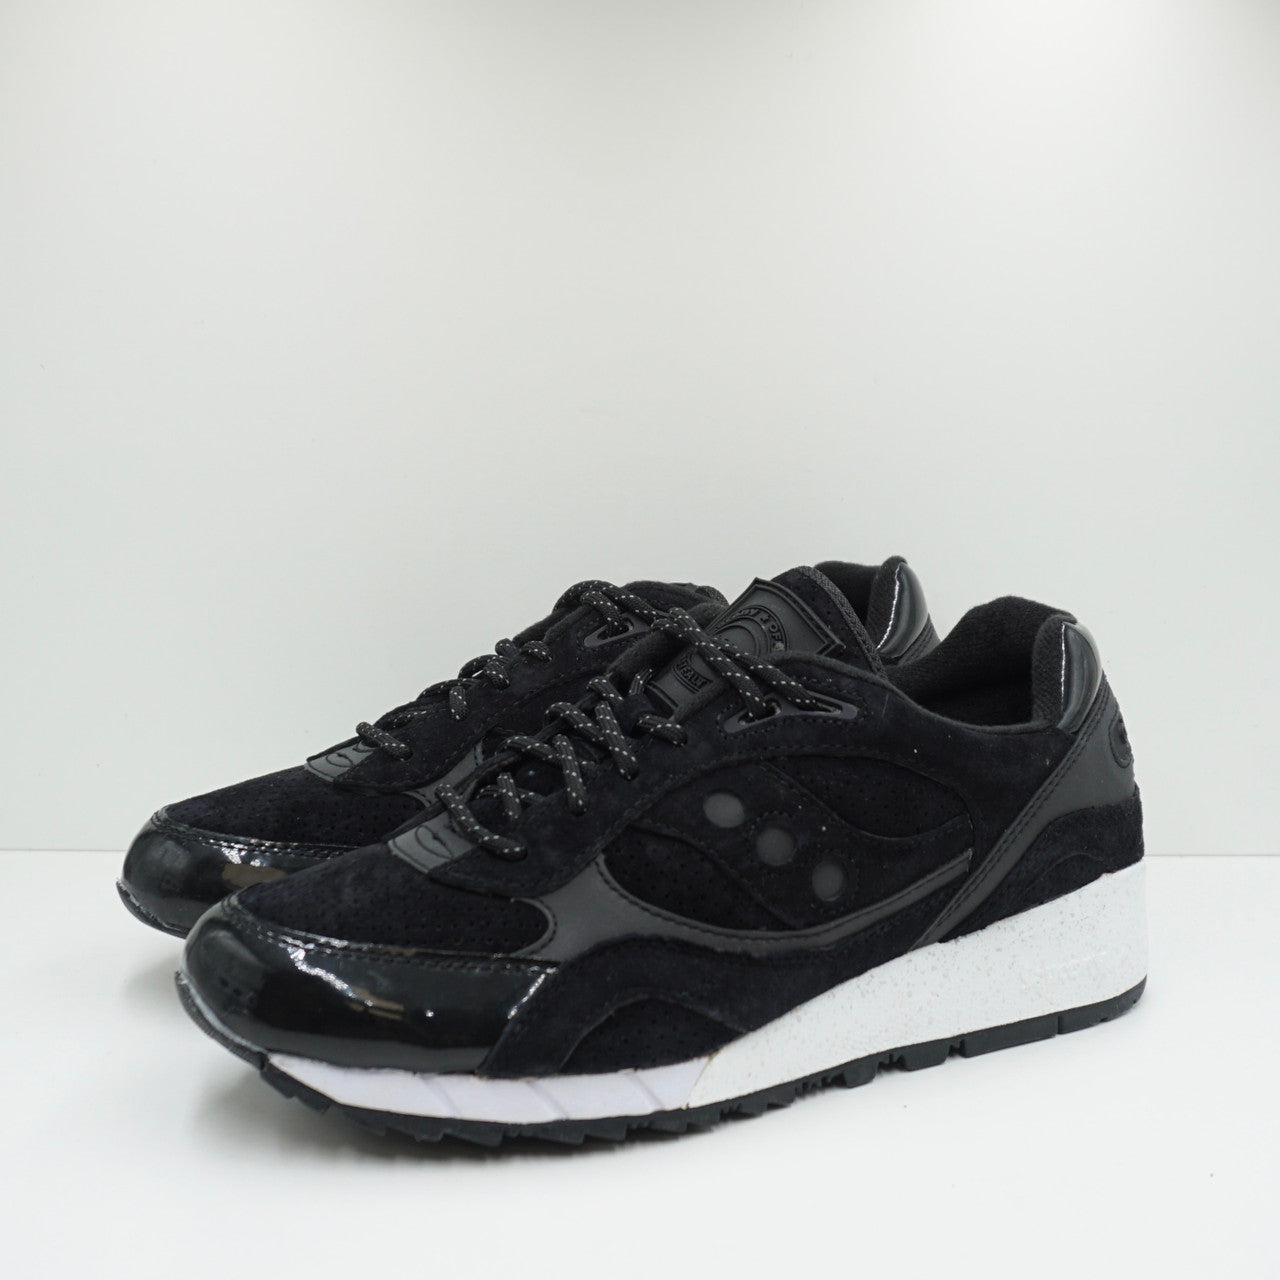 Saucony Shadow 6000 Offspring Stealth